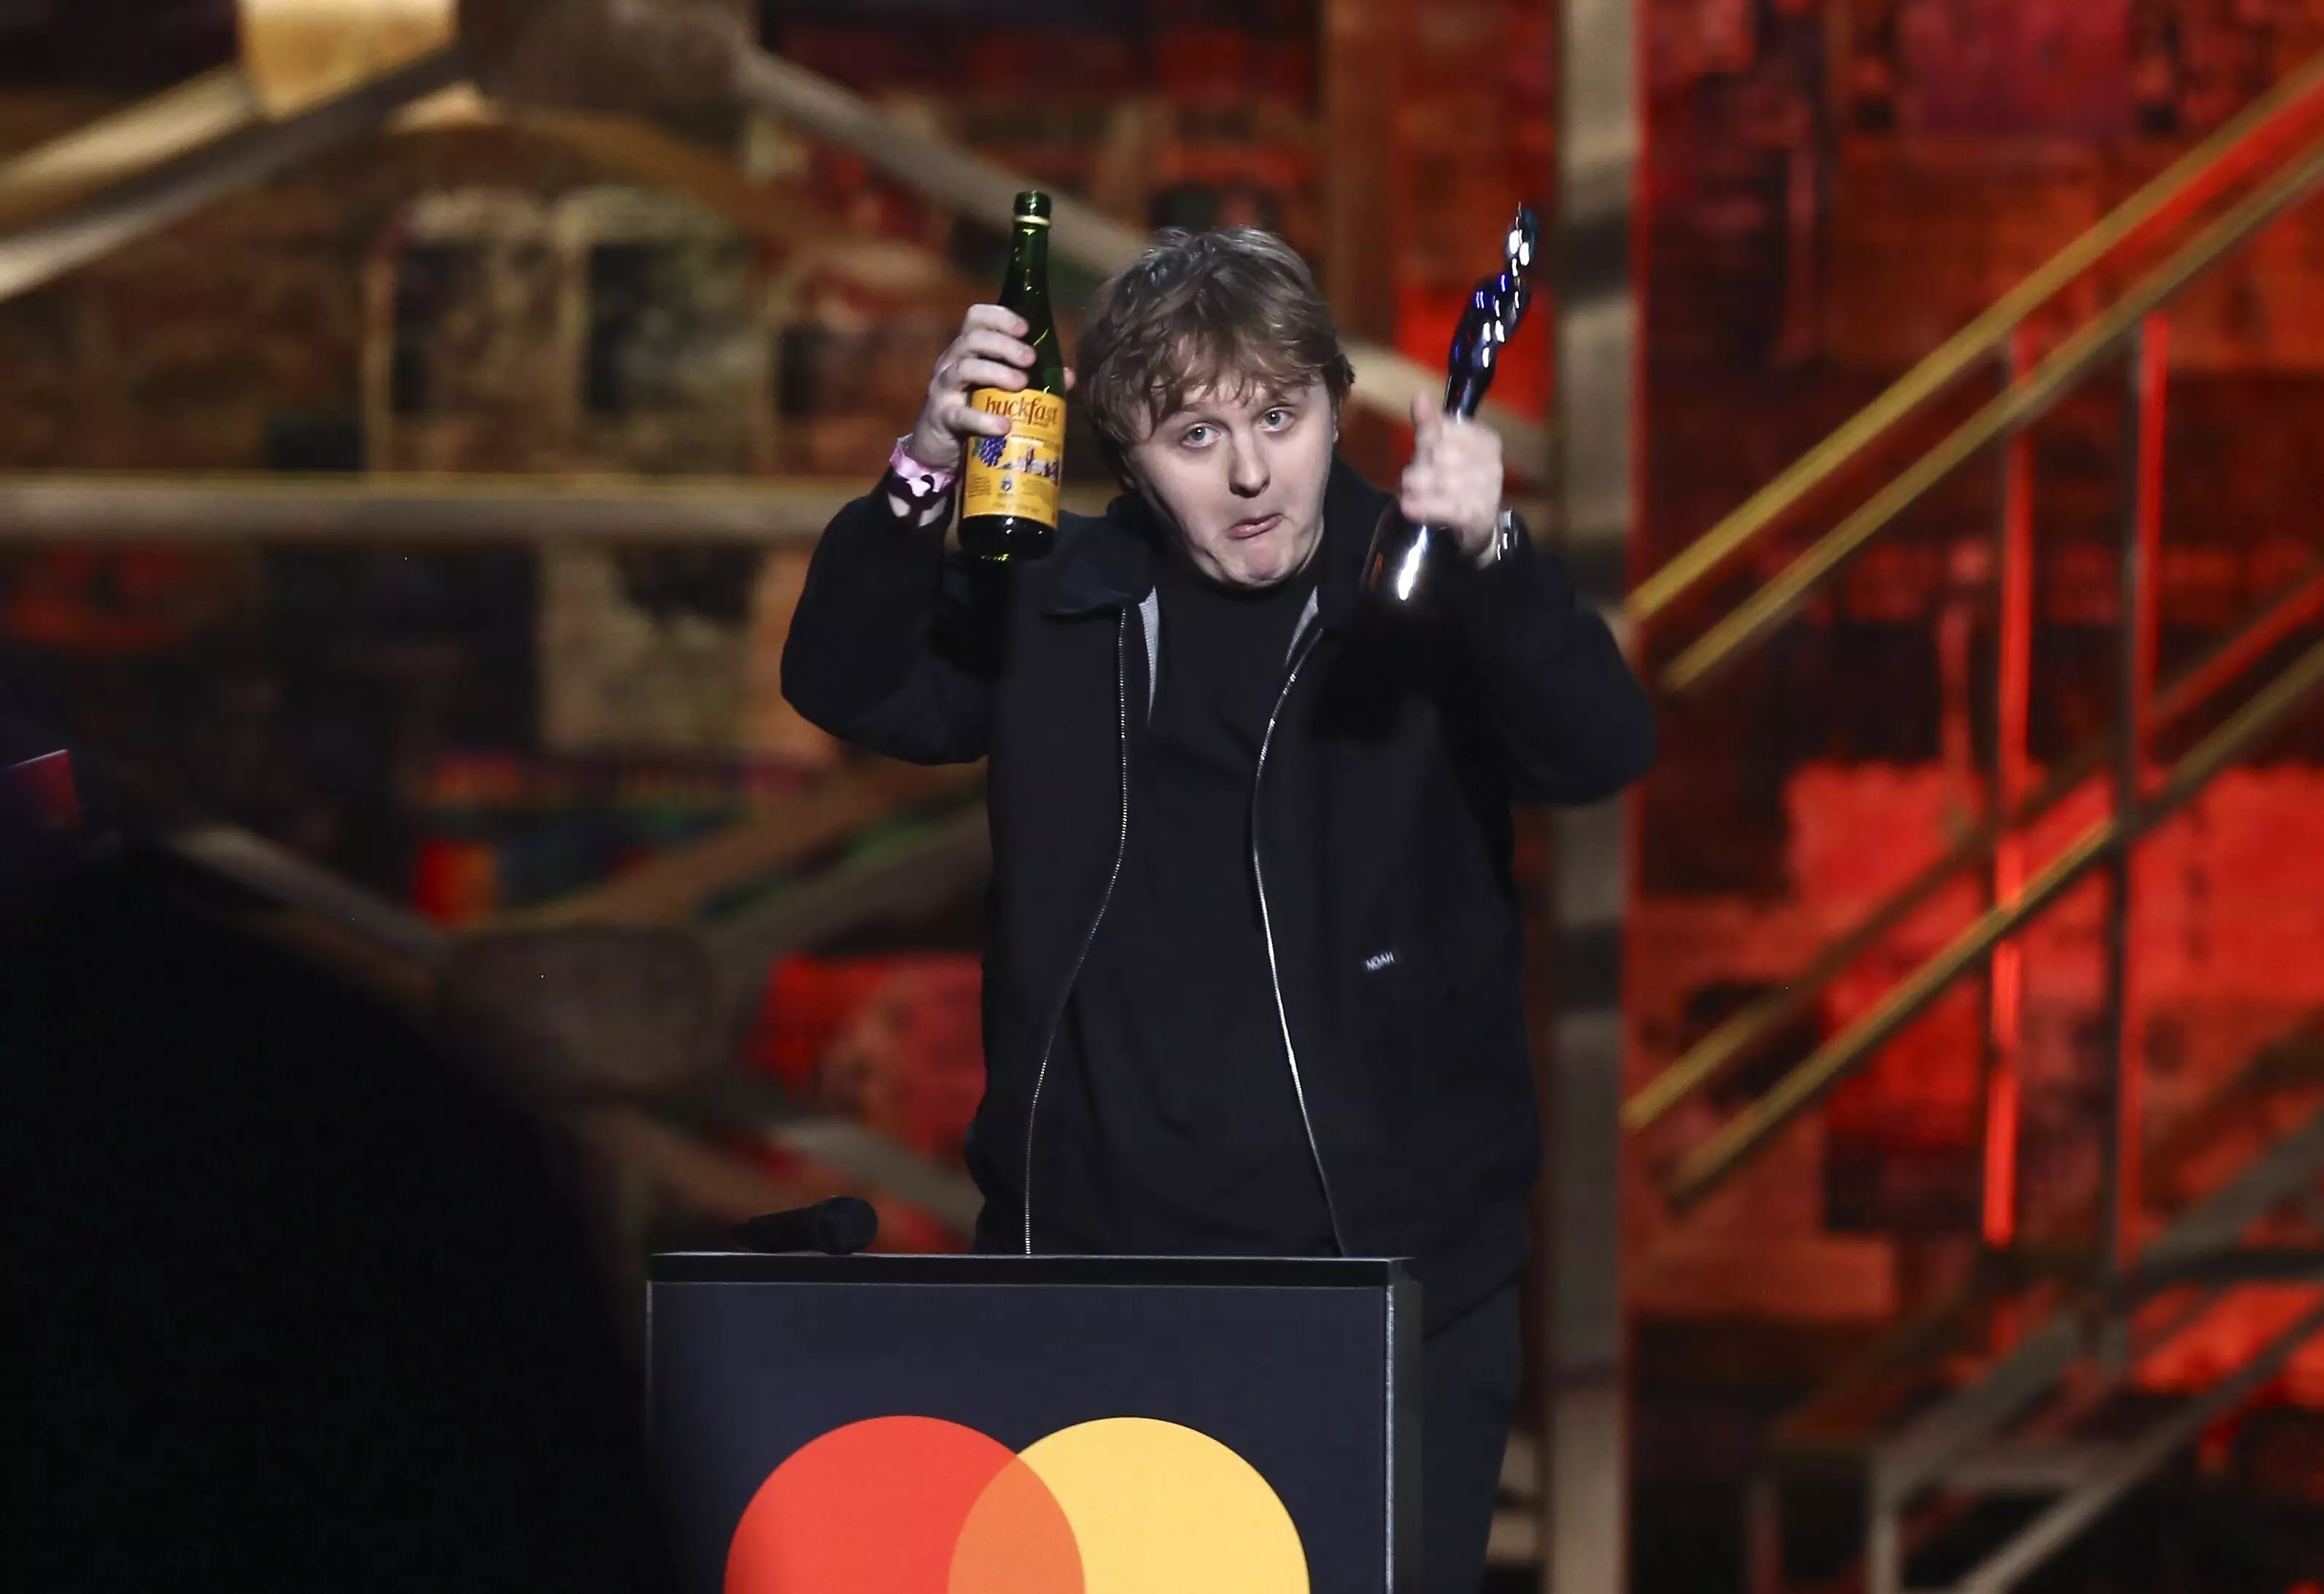 Capaldi getting up for his second BRIT Award.